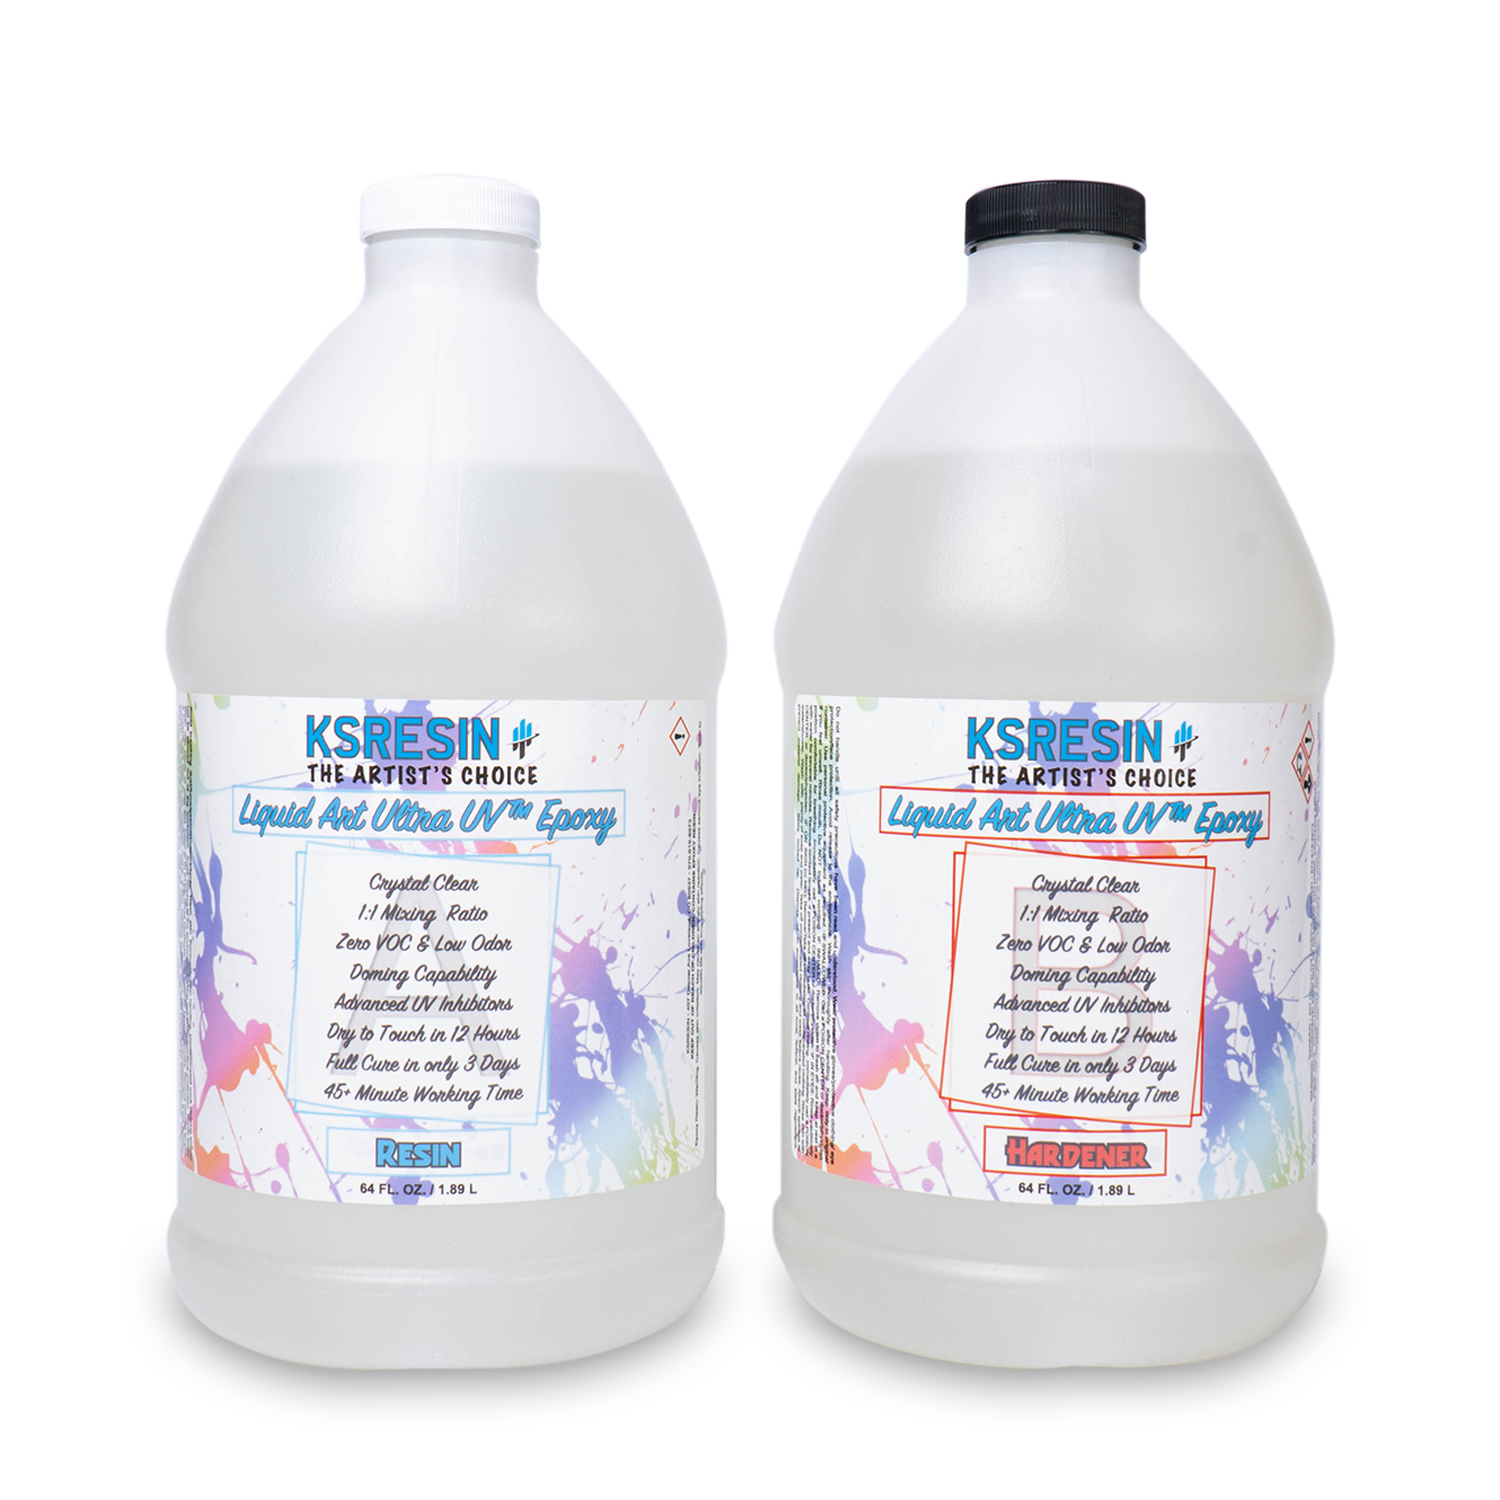 Designer Art Resin 1:1 Superclear Epoxy Resin Systems